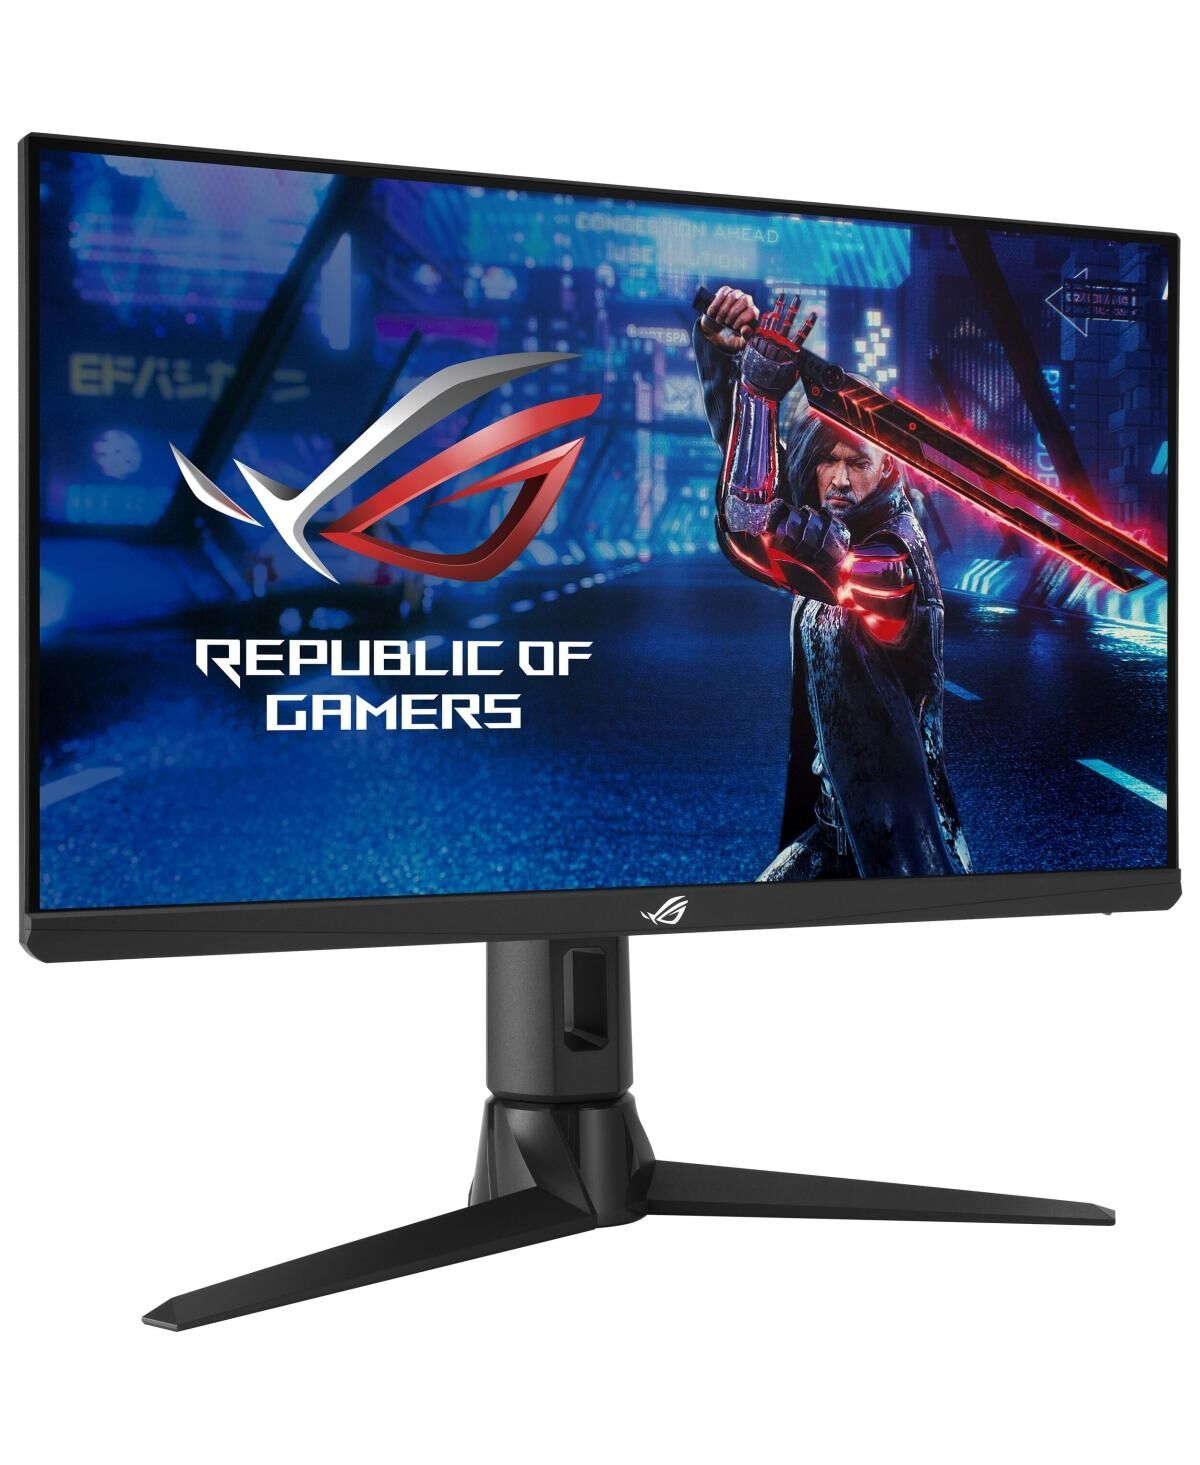 Asus 24.5 in. 180 Hz Hdr Republic of Gamers Strix Gaming Monitor - Black.